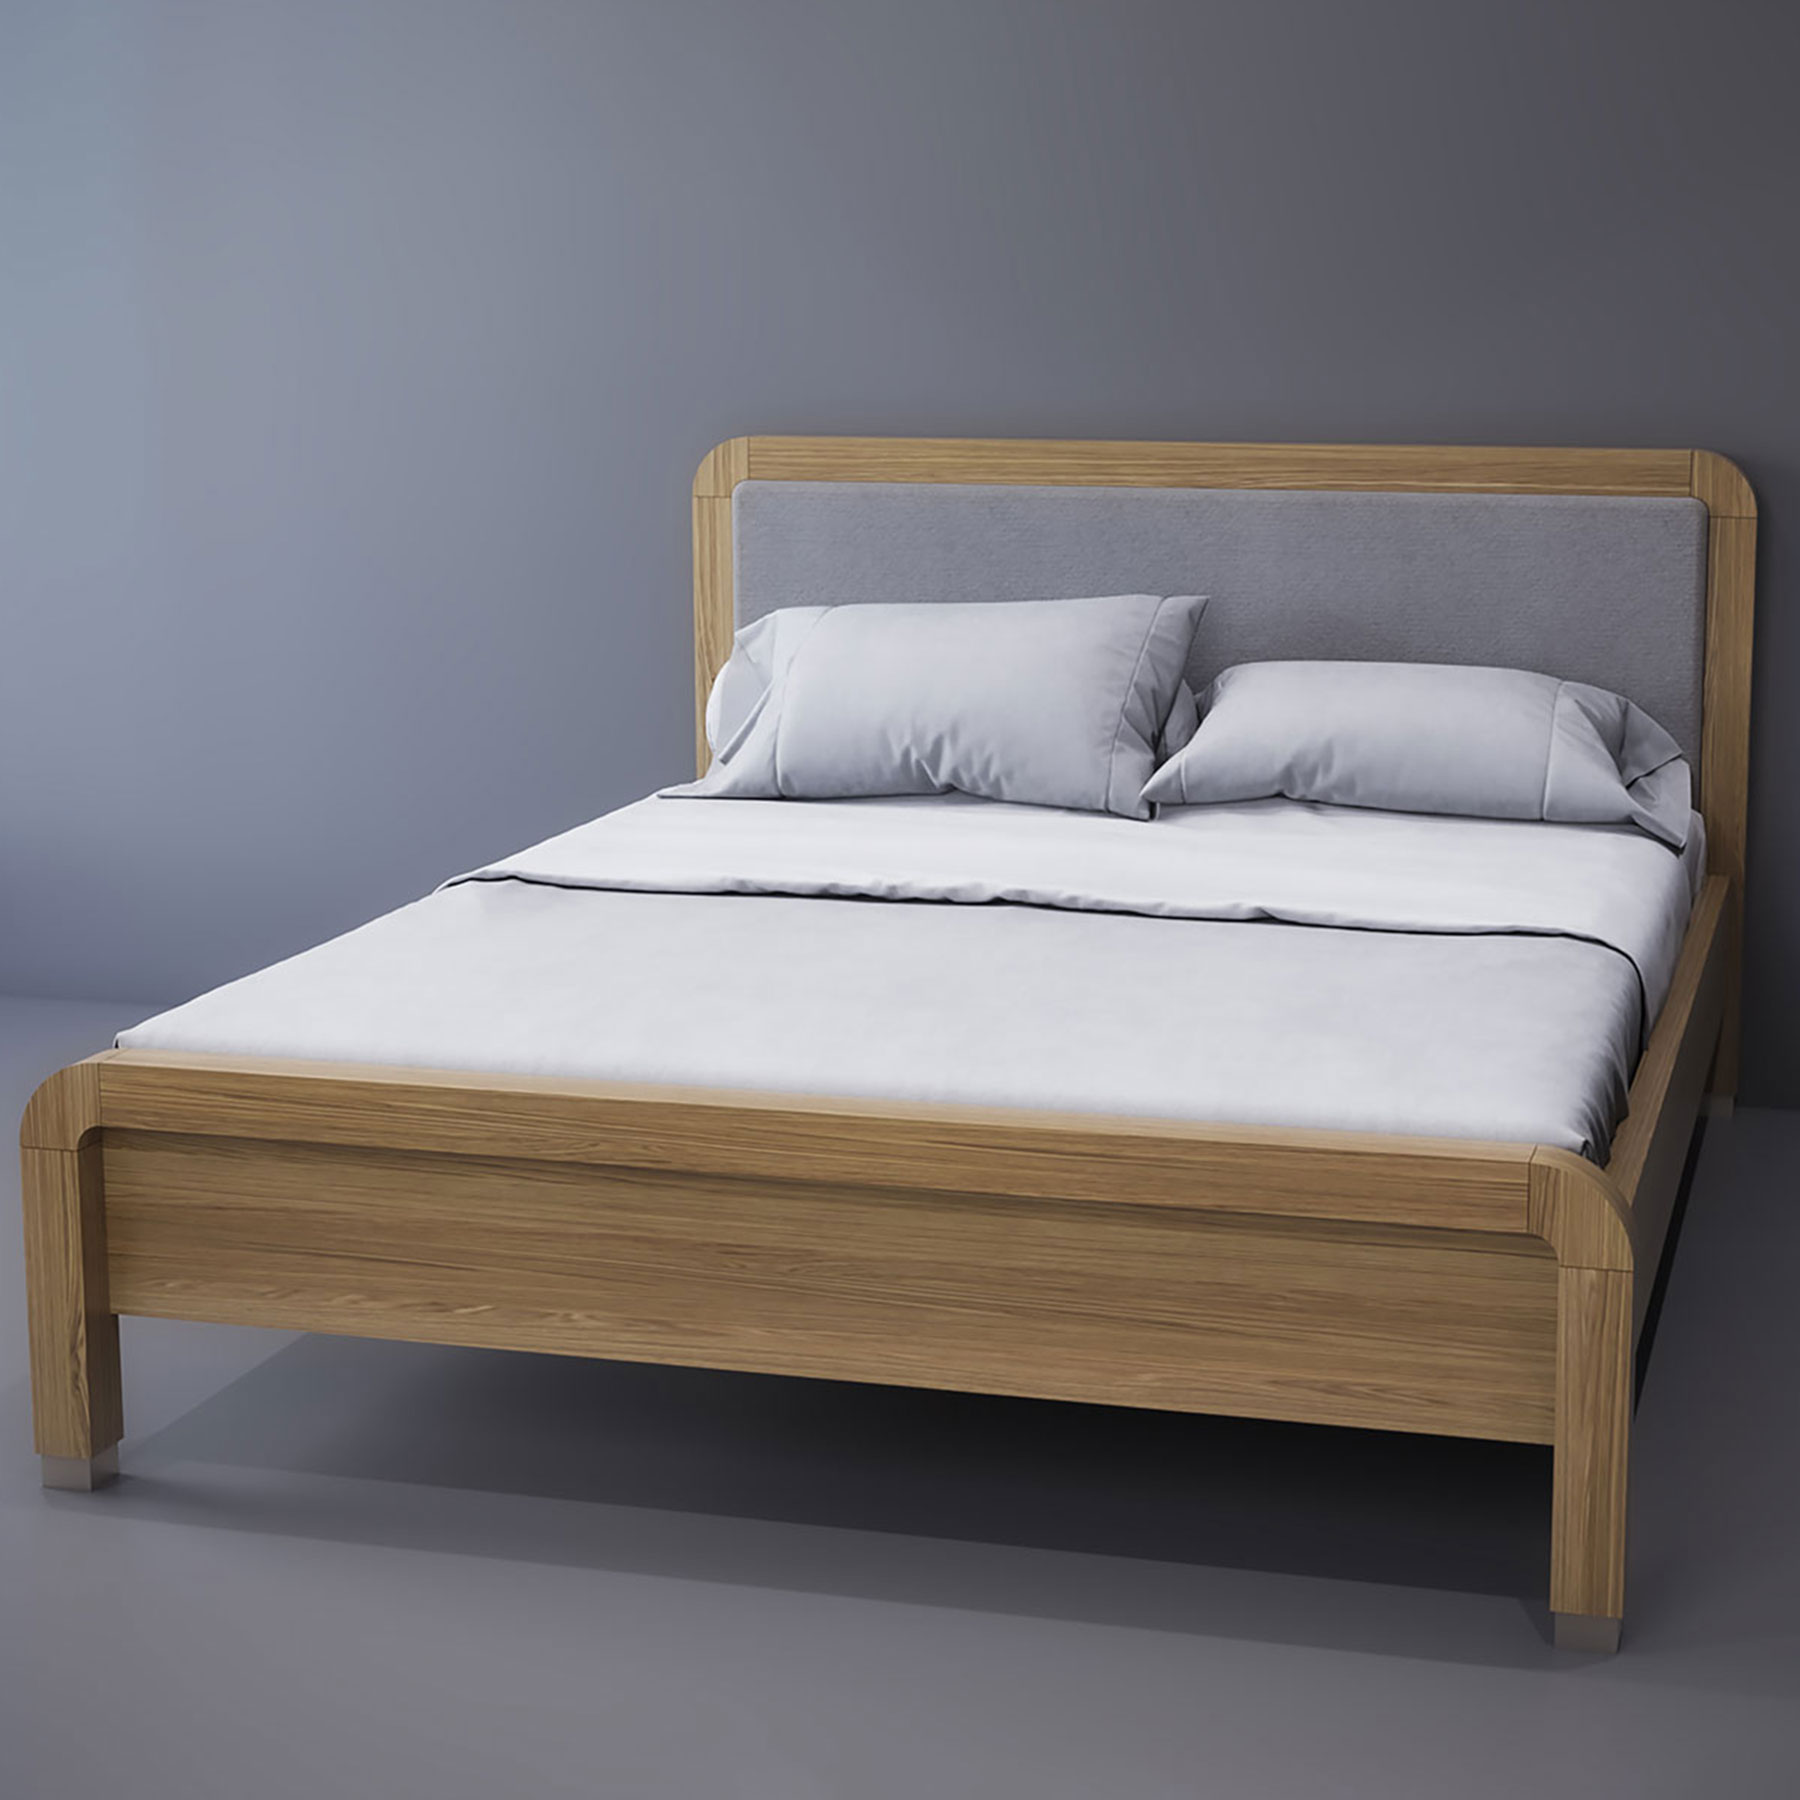 Double bed from the Warsaw collection 2